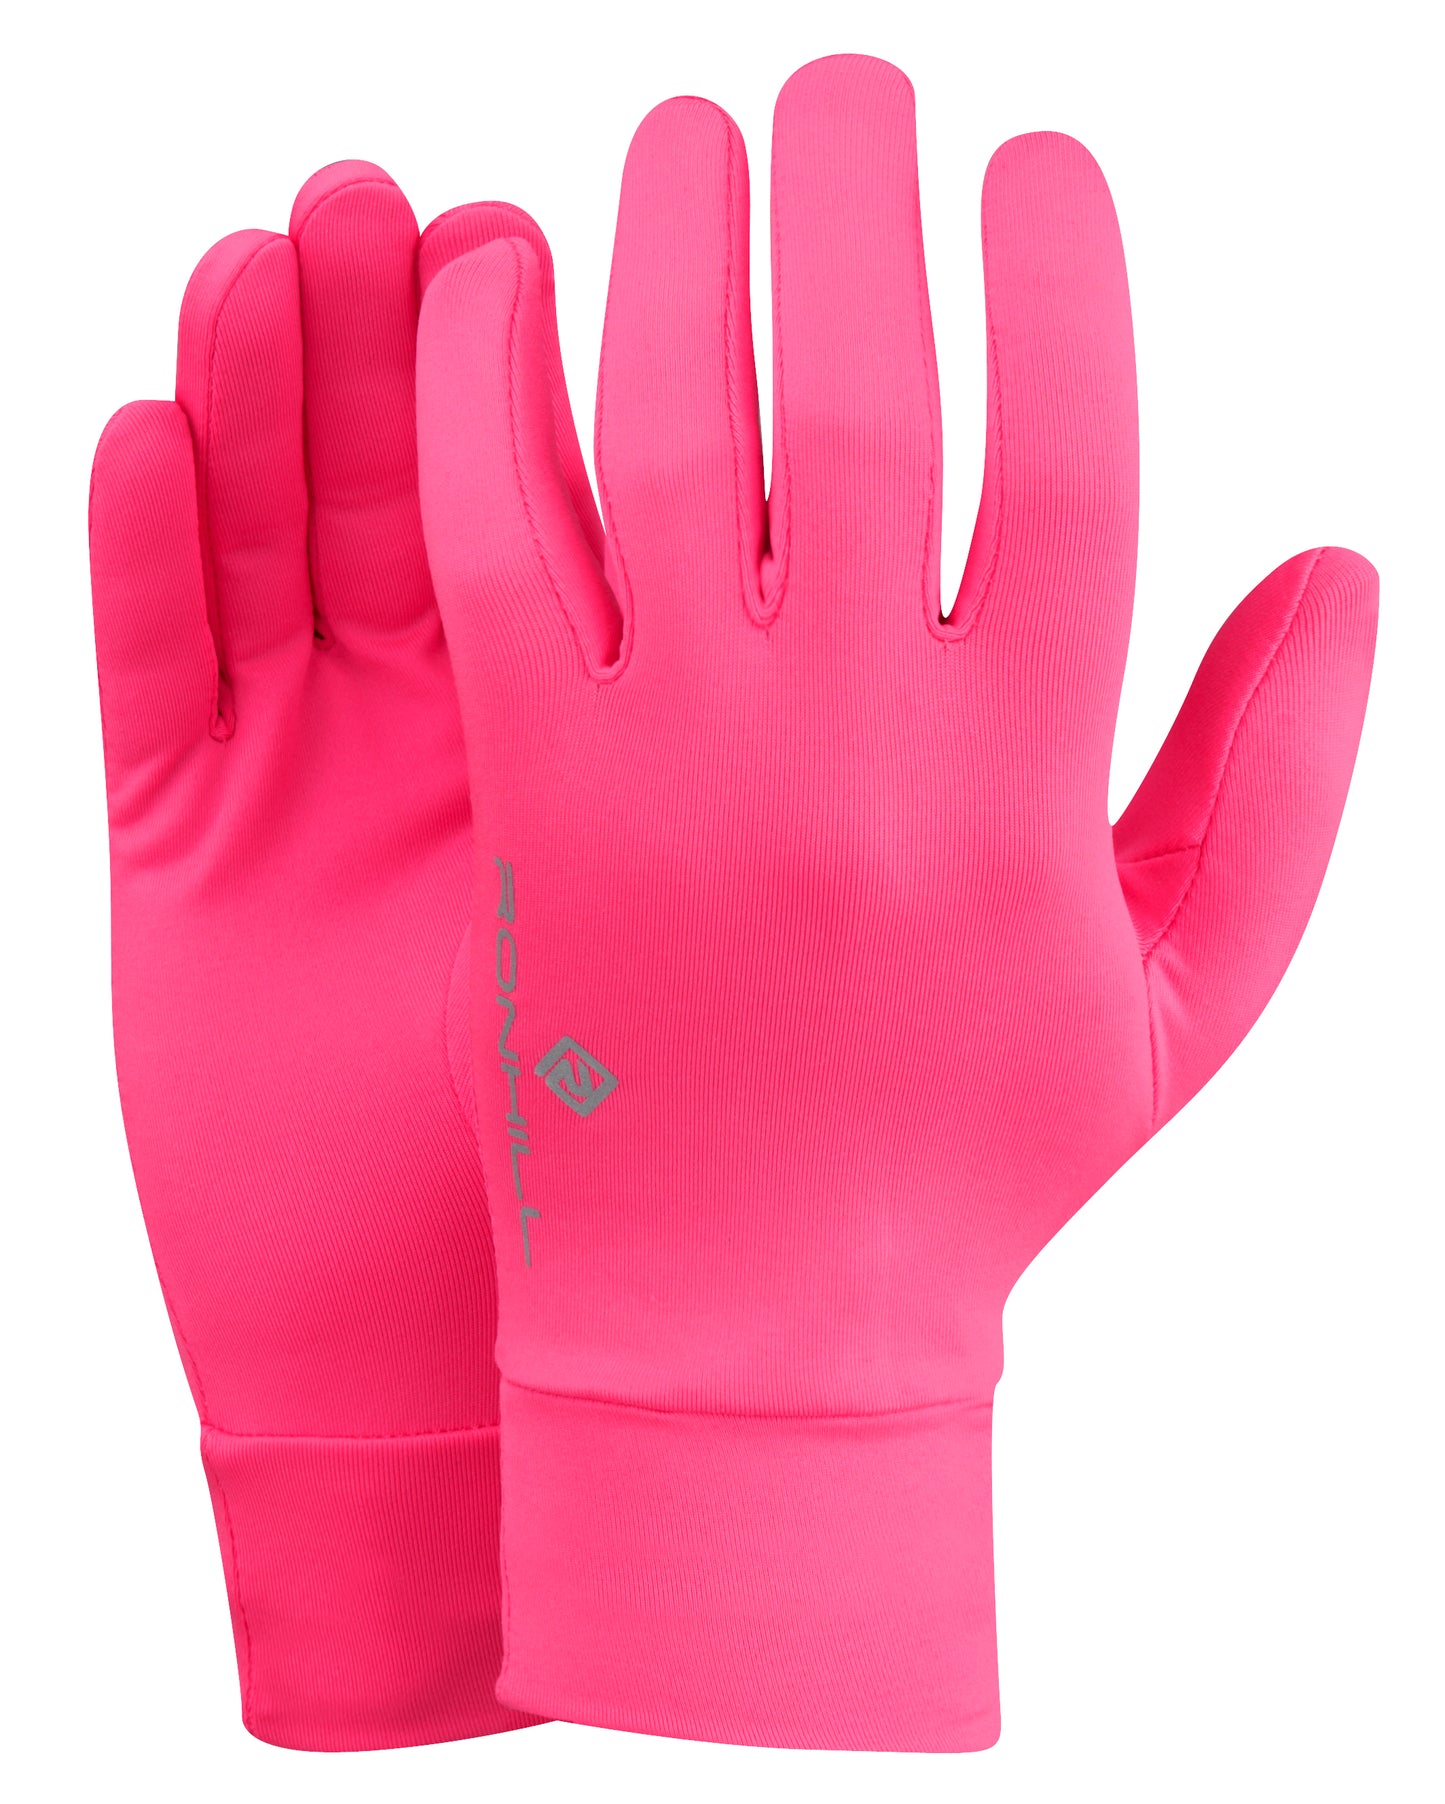 Ronhill classic glove in hot pink